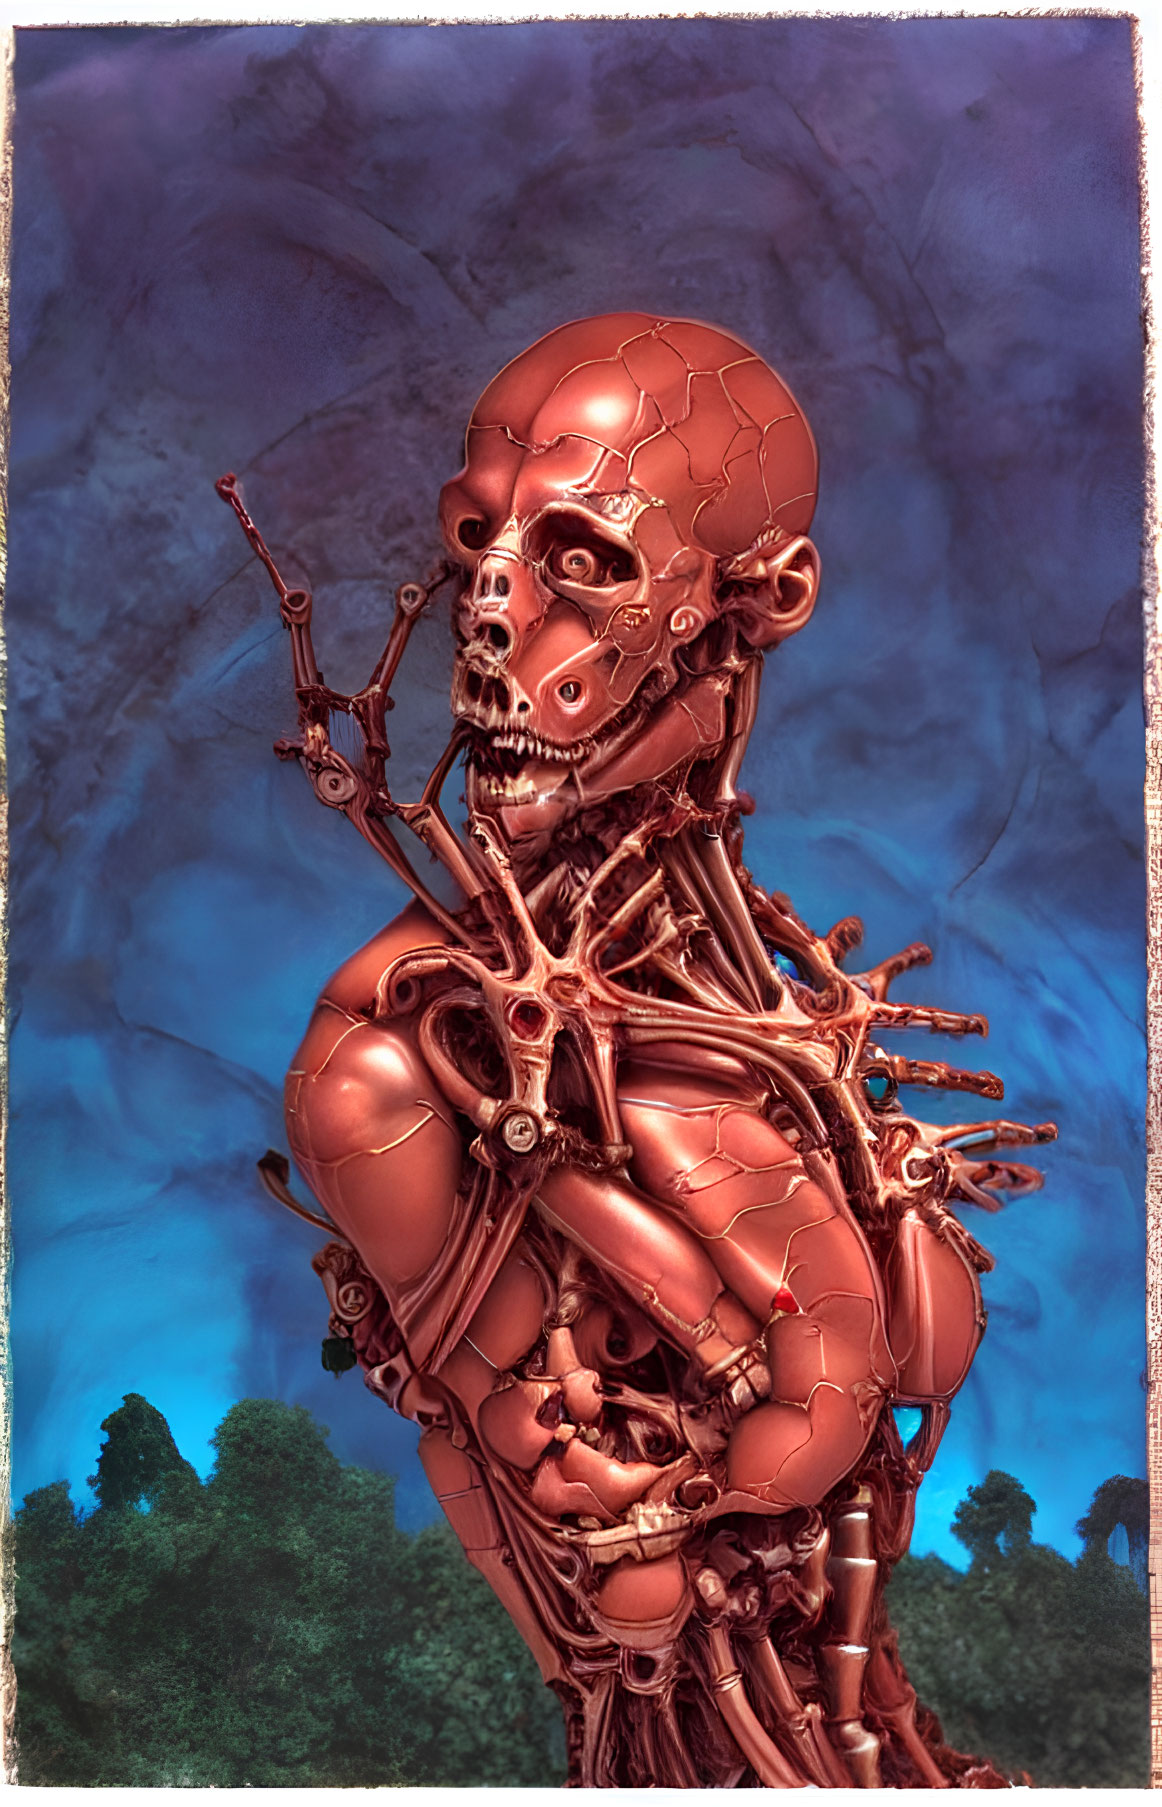 Detailed humanoid robotic figure with exposed skeletal structure and mechanical parts on blue backdrop with trees